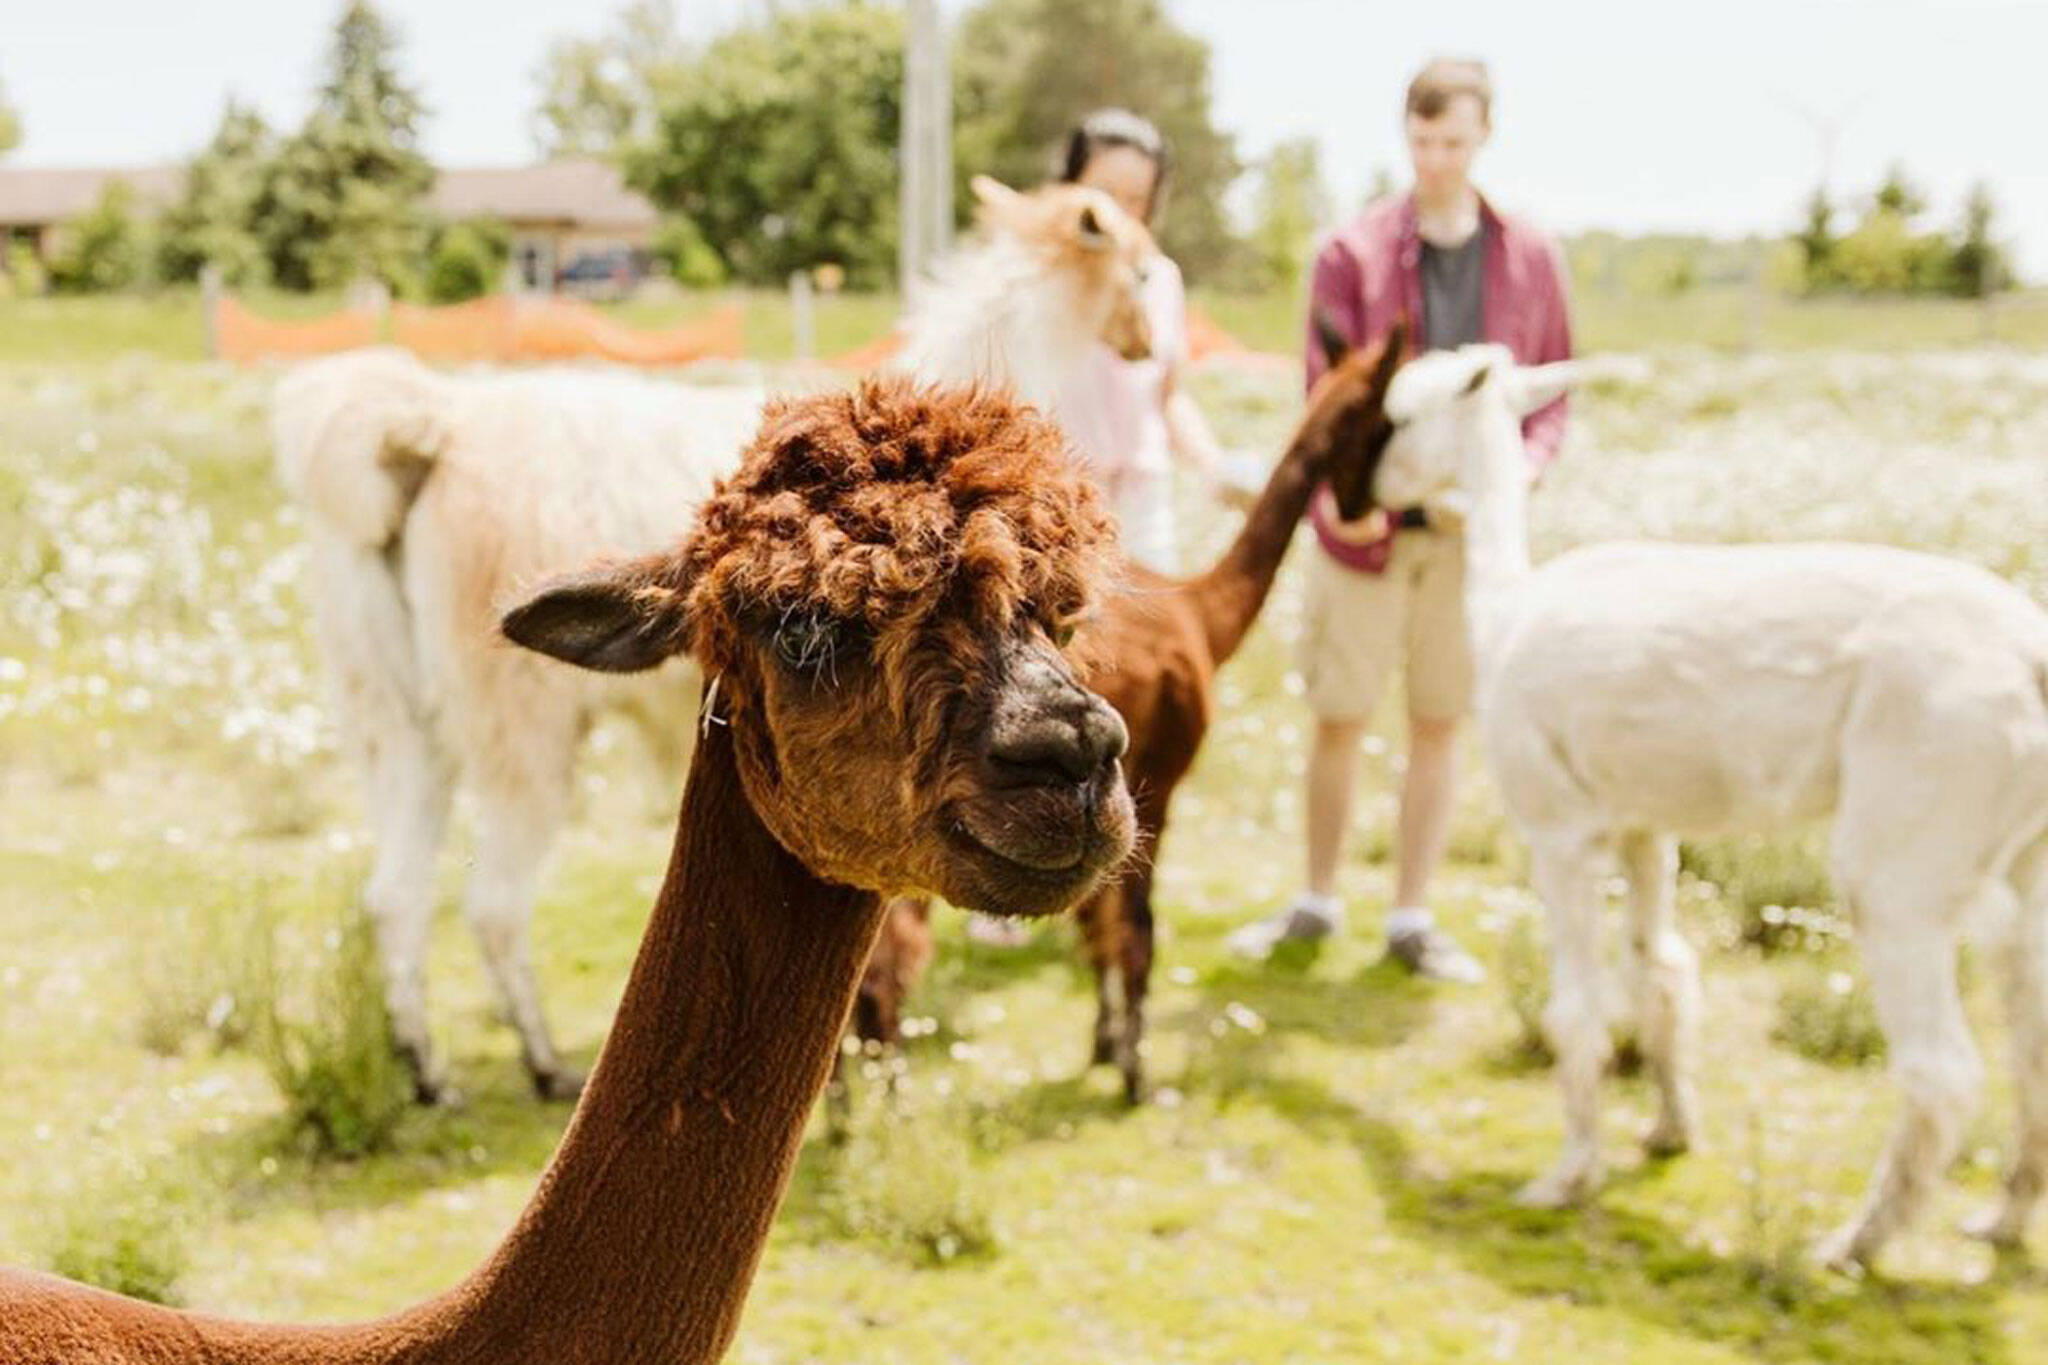 You can walk and pet alpacas at this farm near Toronto but you'll need to social distance